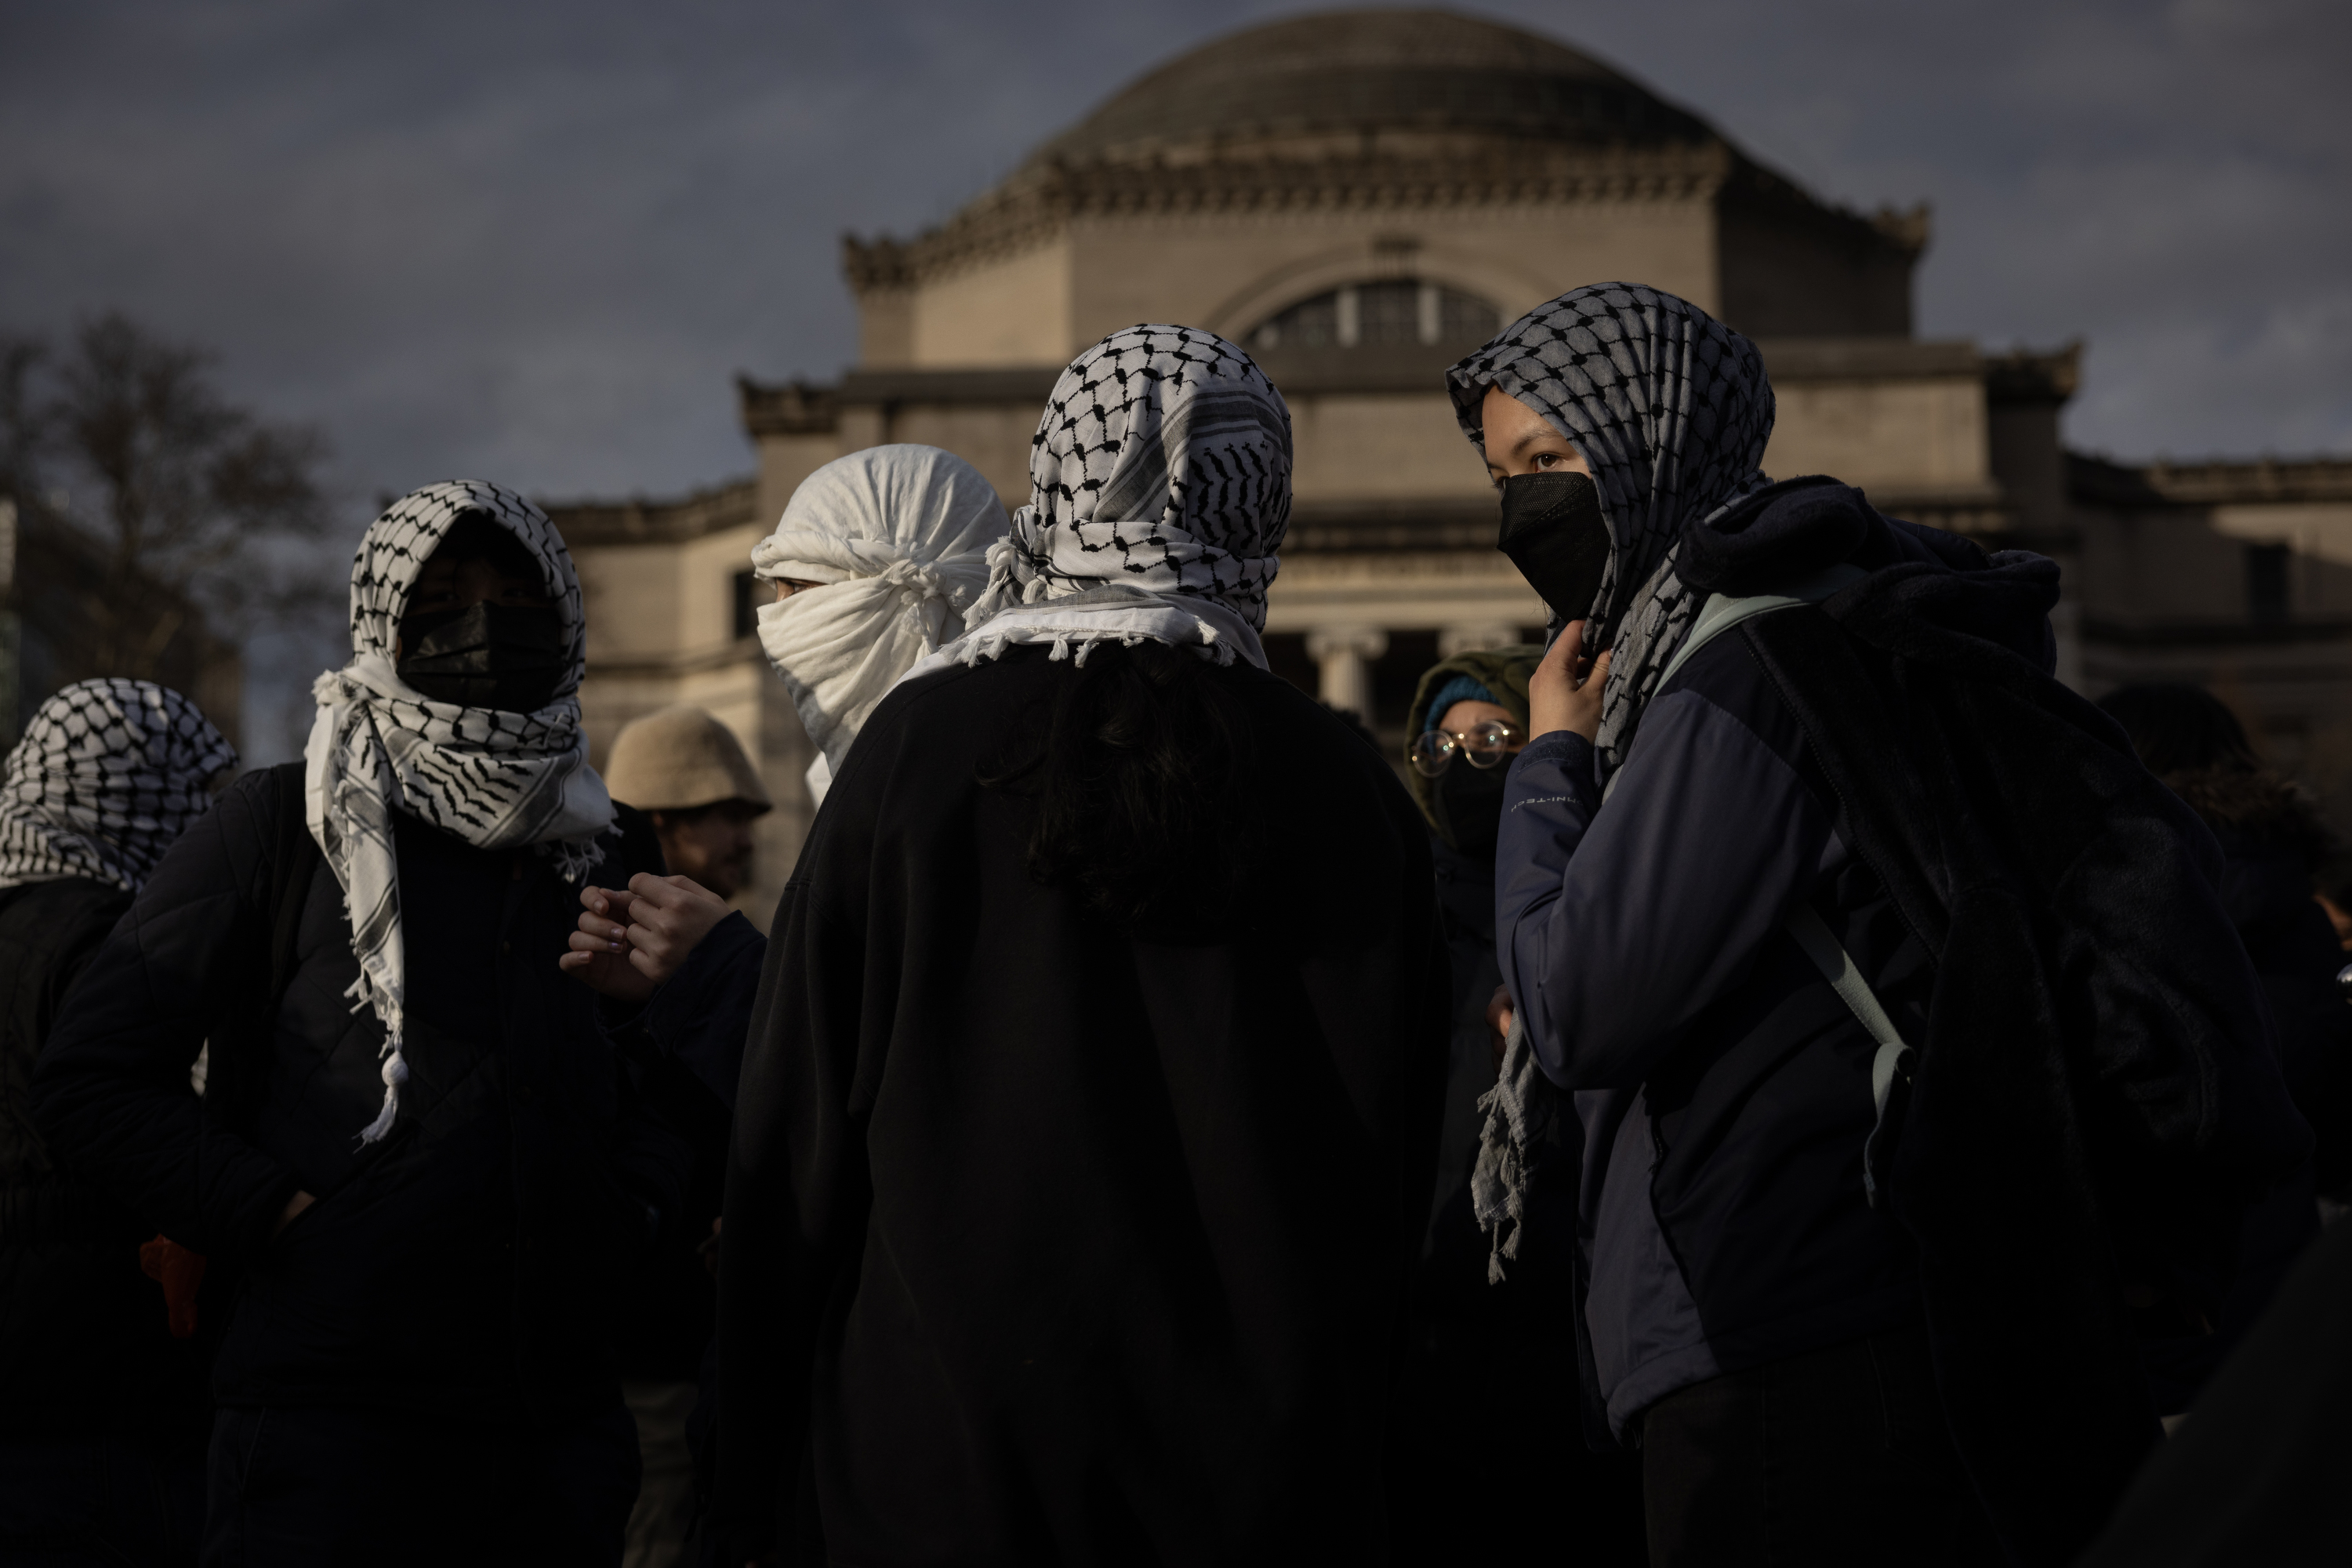 at columbia, israel-gaza tensions simmer as leaders face house hearing